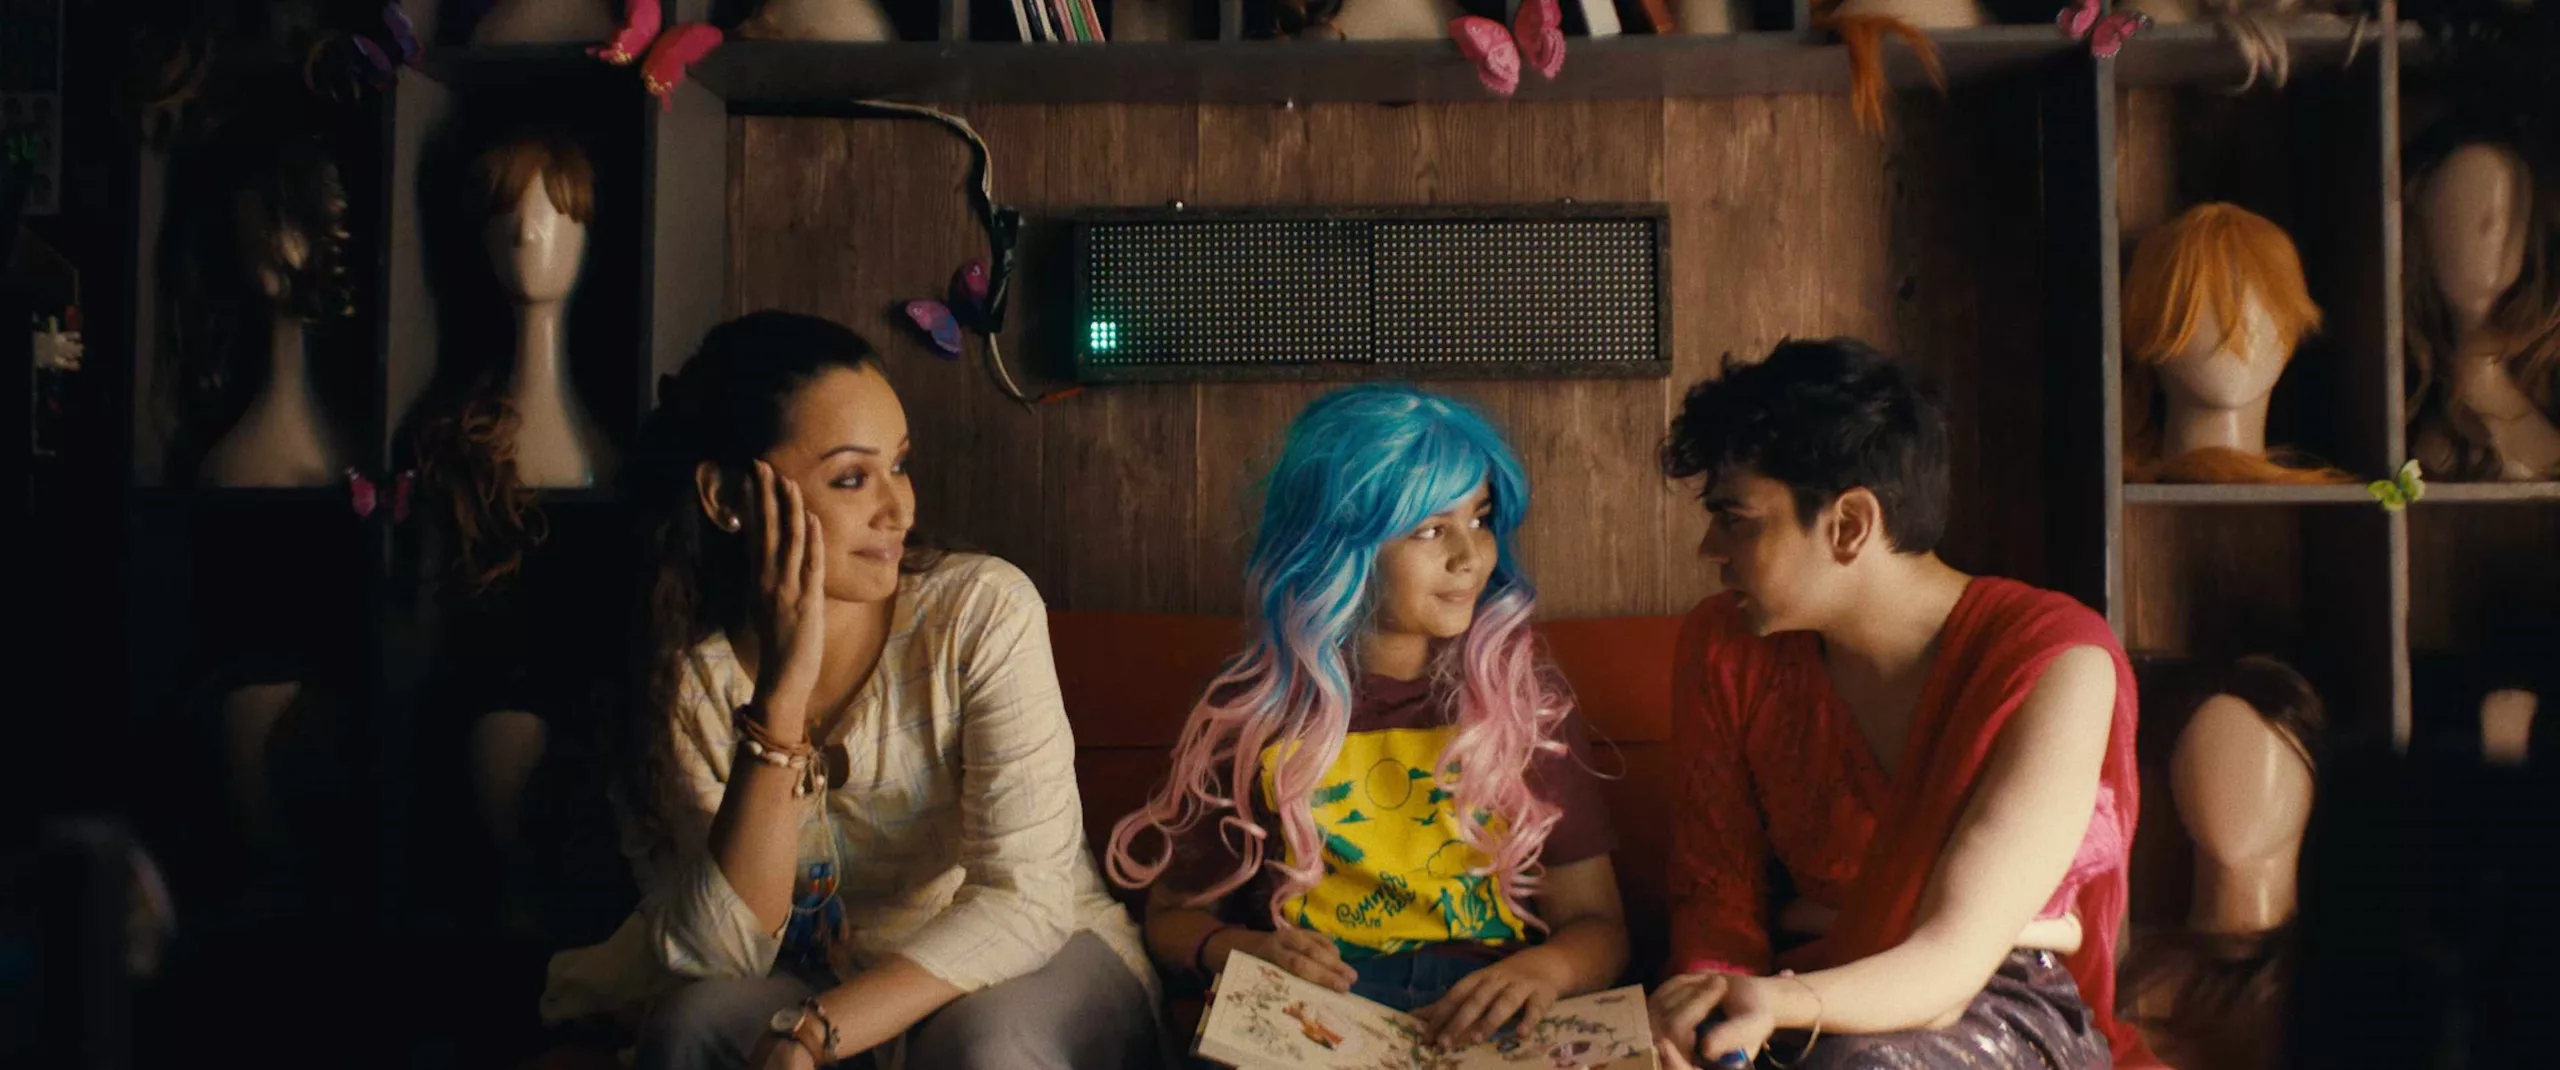 A young chilld in blue and pink wig sitting between two adults in front of a wall with other wigs